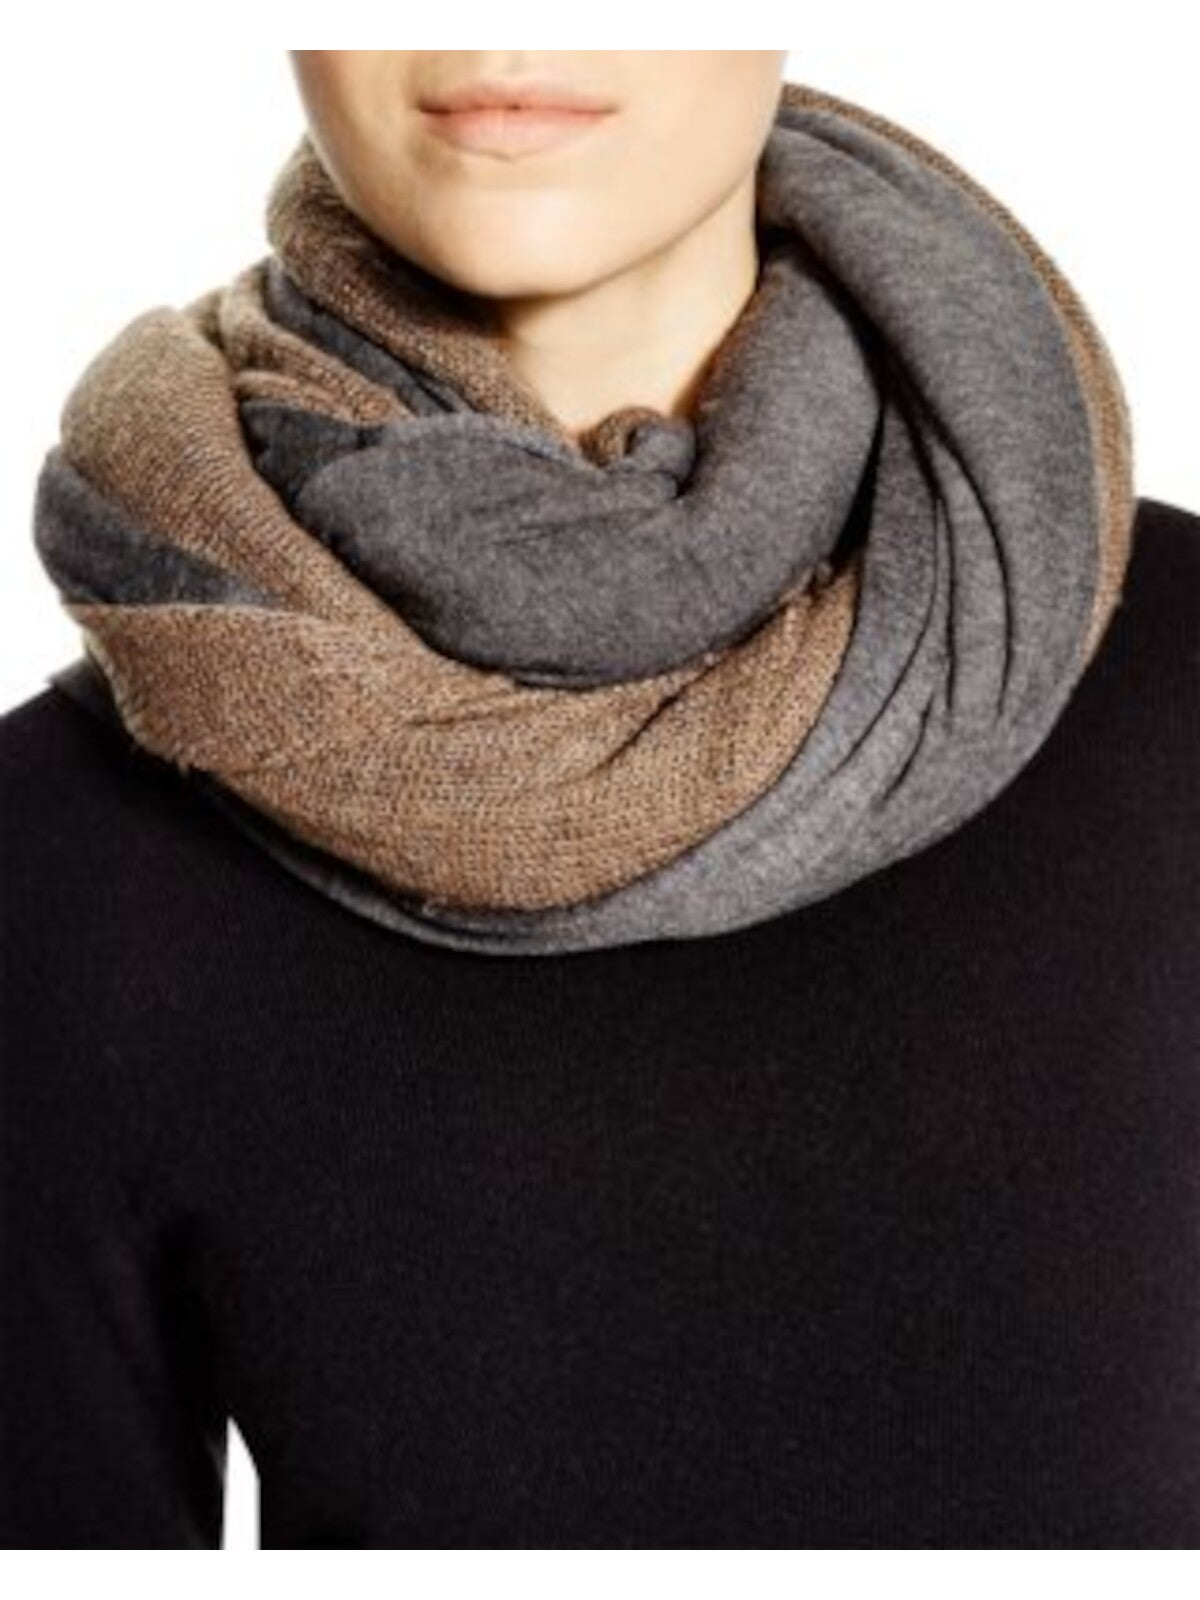 DONNI CHARM Womens Beige Cotton Mixed Media Colorblock Neckwarmer Scarf